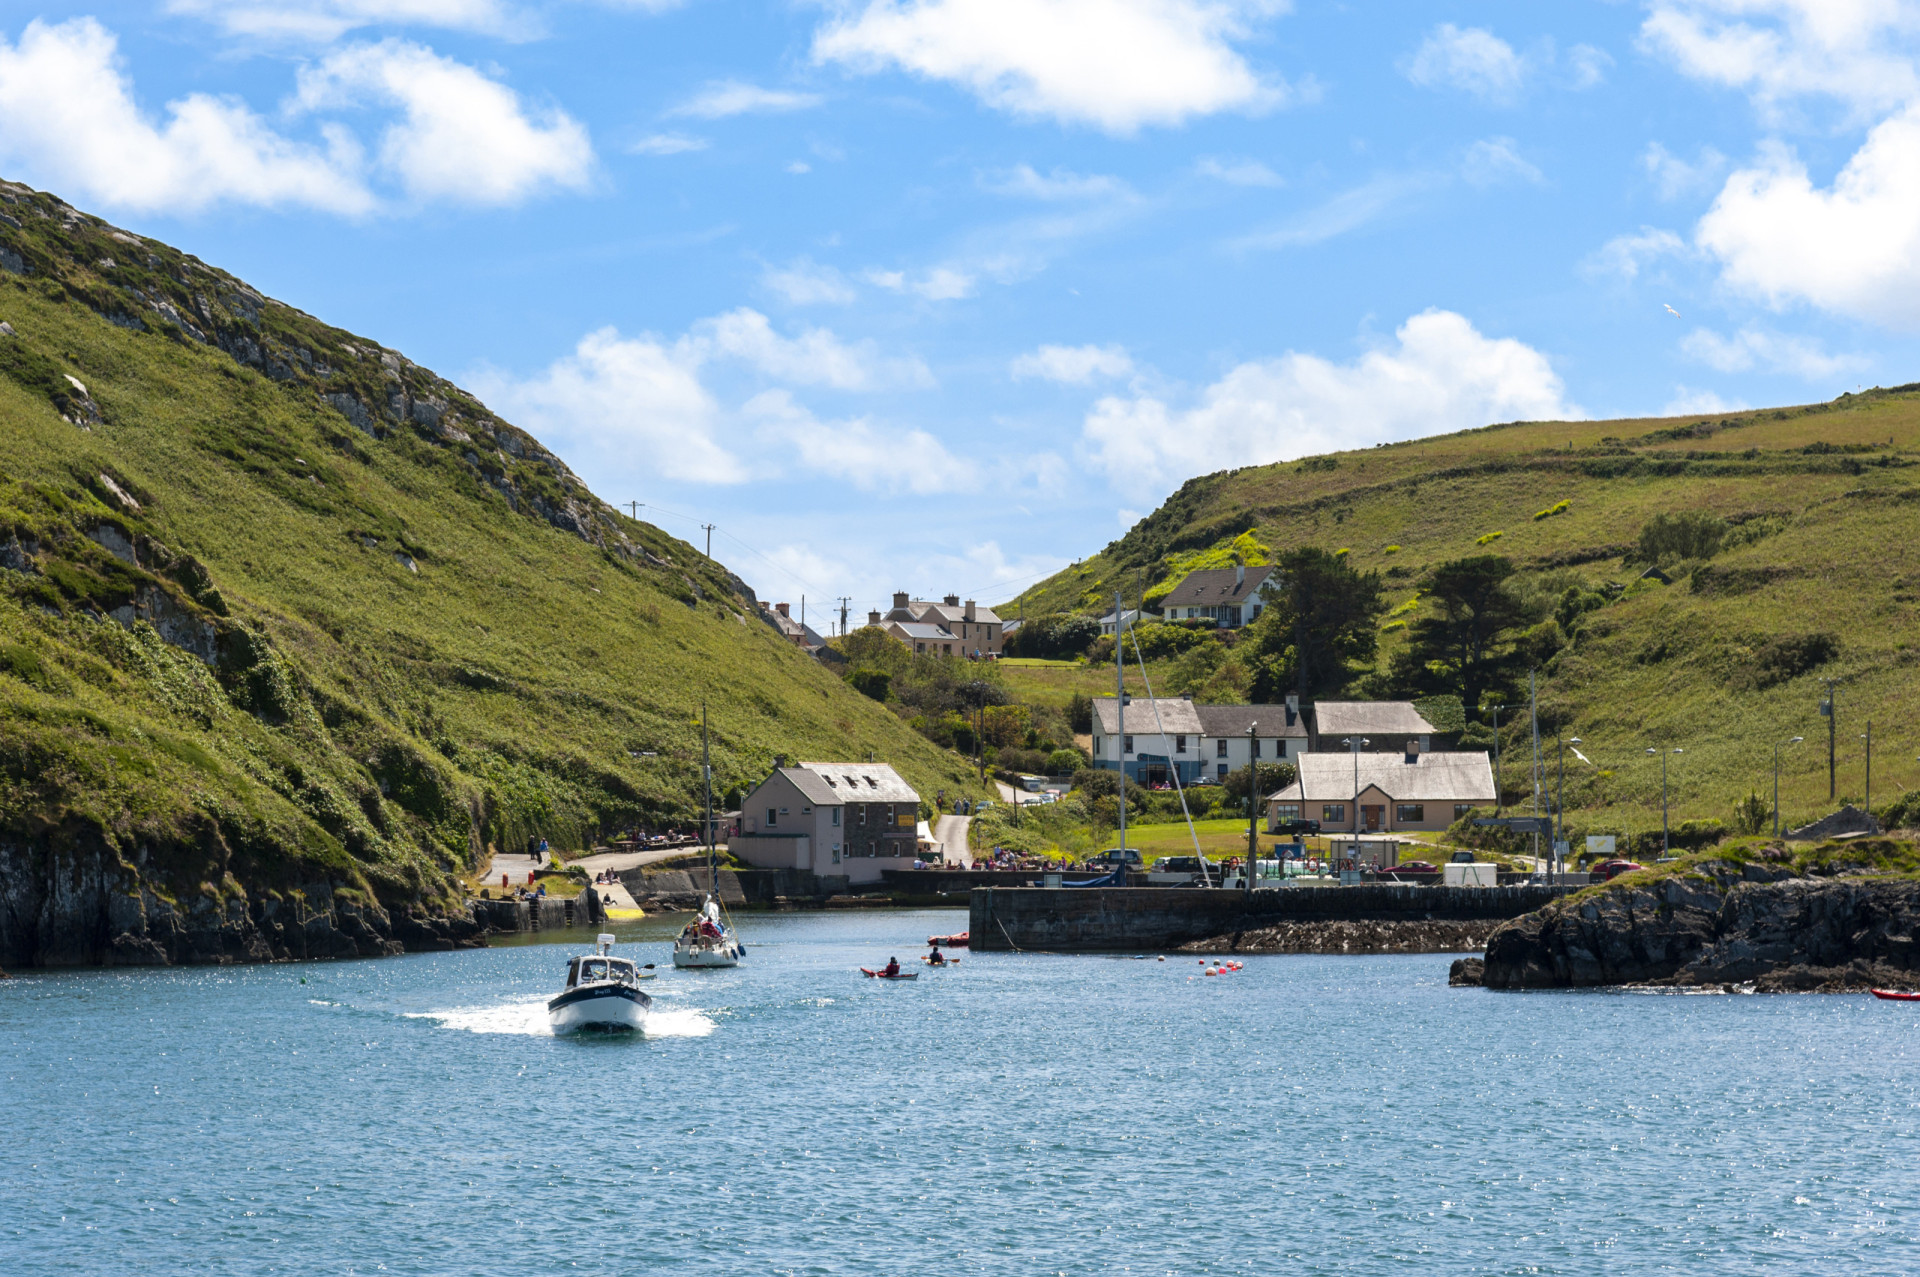 <p>This Irish-speaking island lies just 1 nautical mile (2 km) to the east of neighboring Sherkin Island. The south harbor welcomes many yachts and pleasure boats to this picturesque refuge.</p>